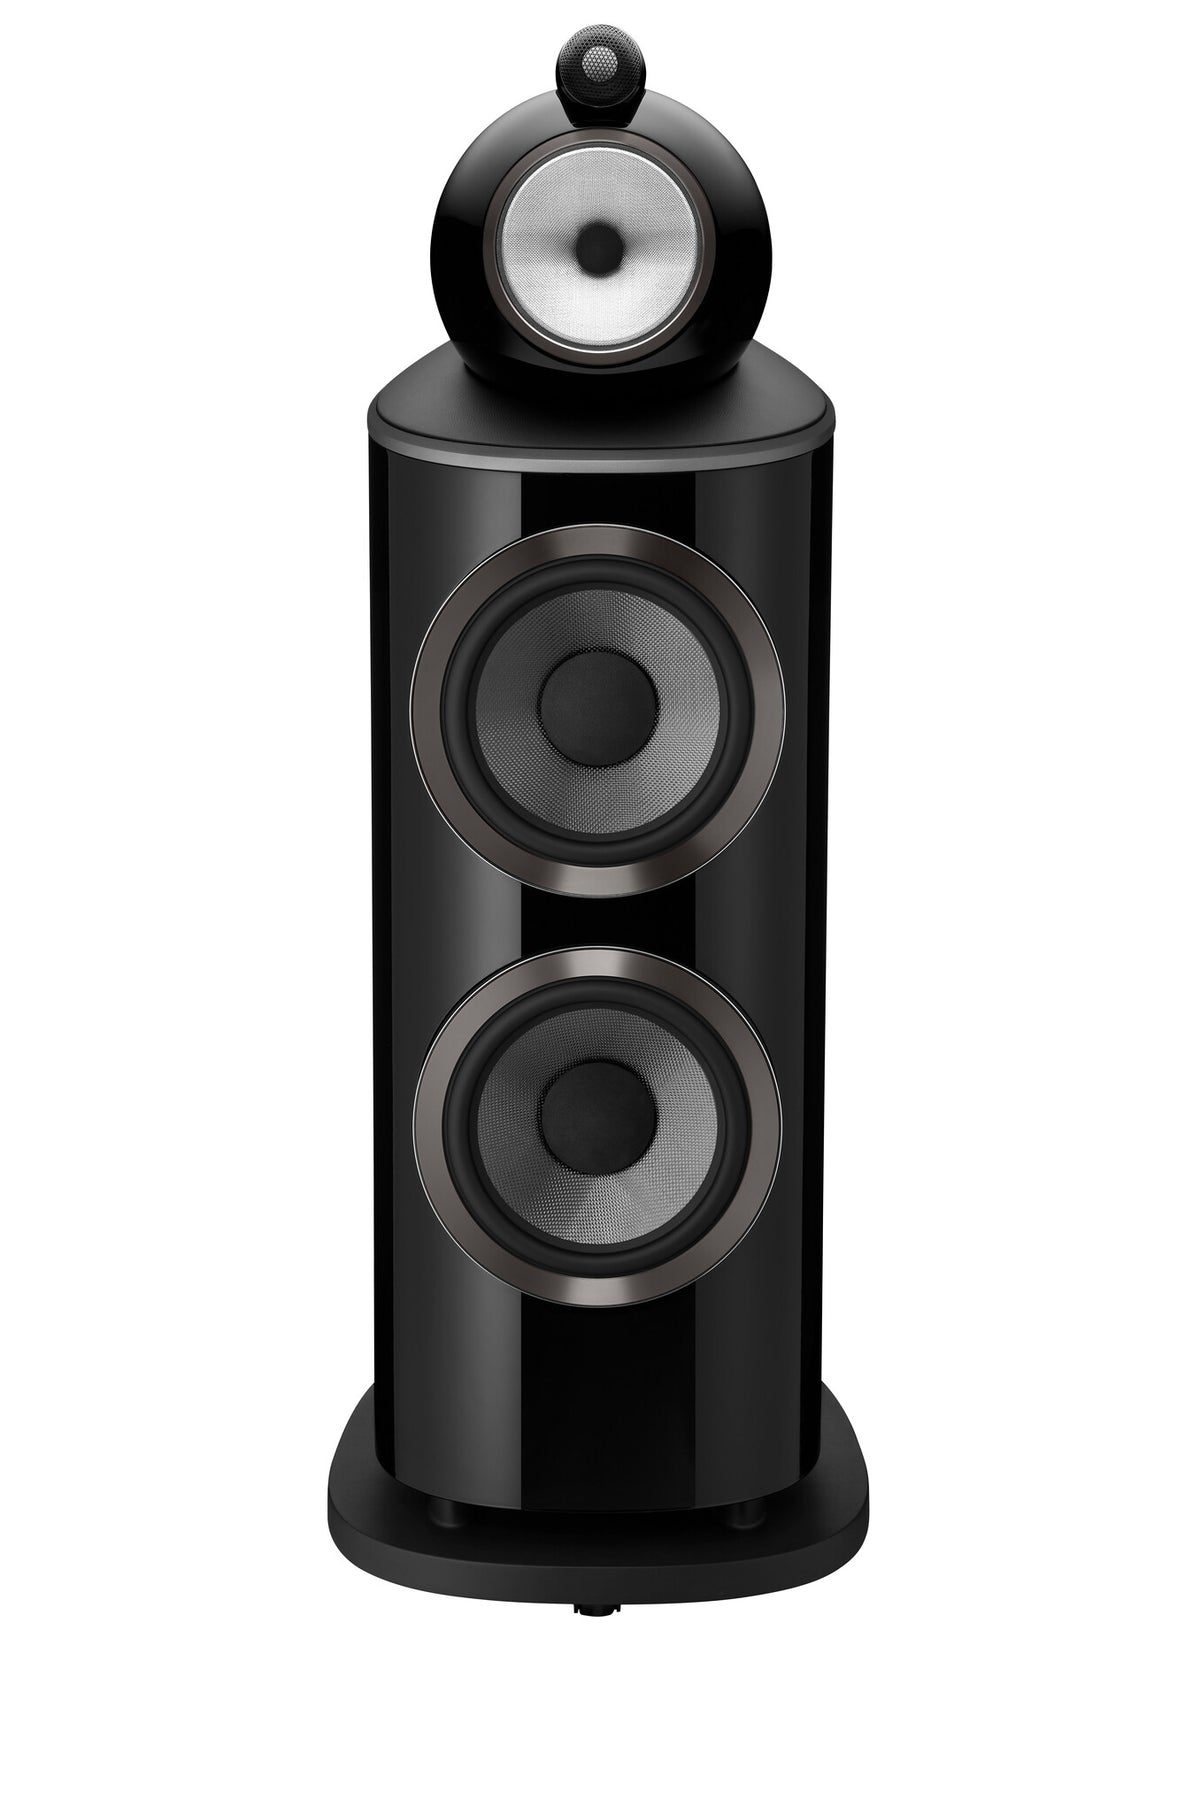 Bowers and Wilkins 801 D4 - Suncoast Audio